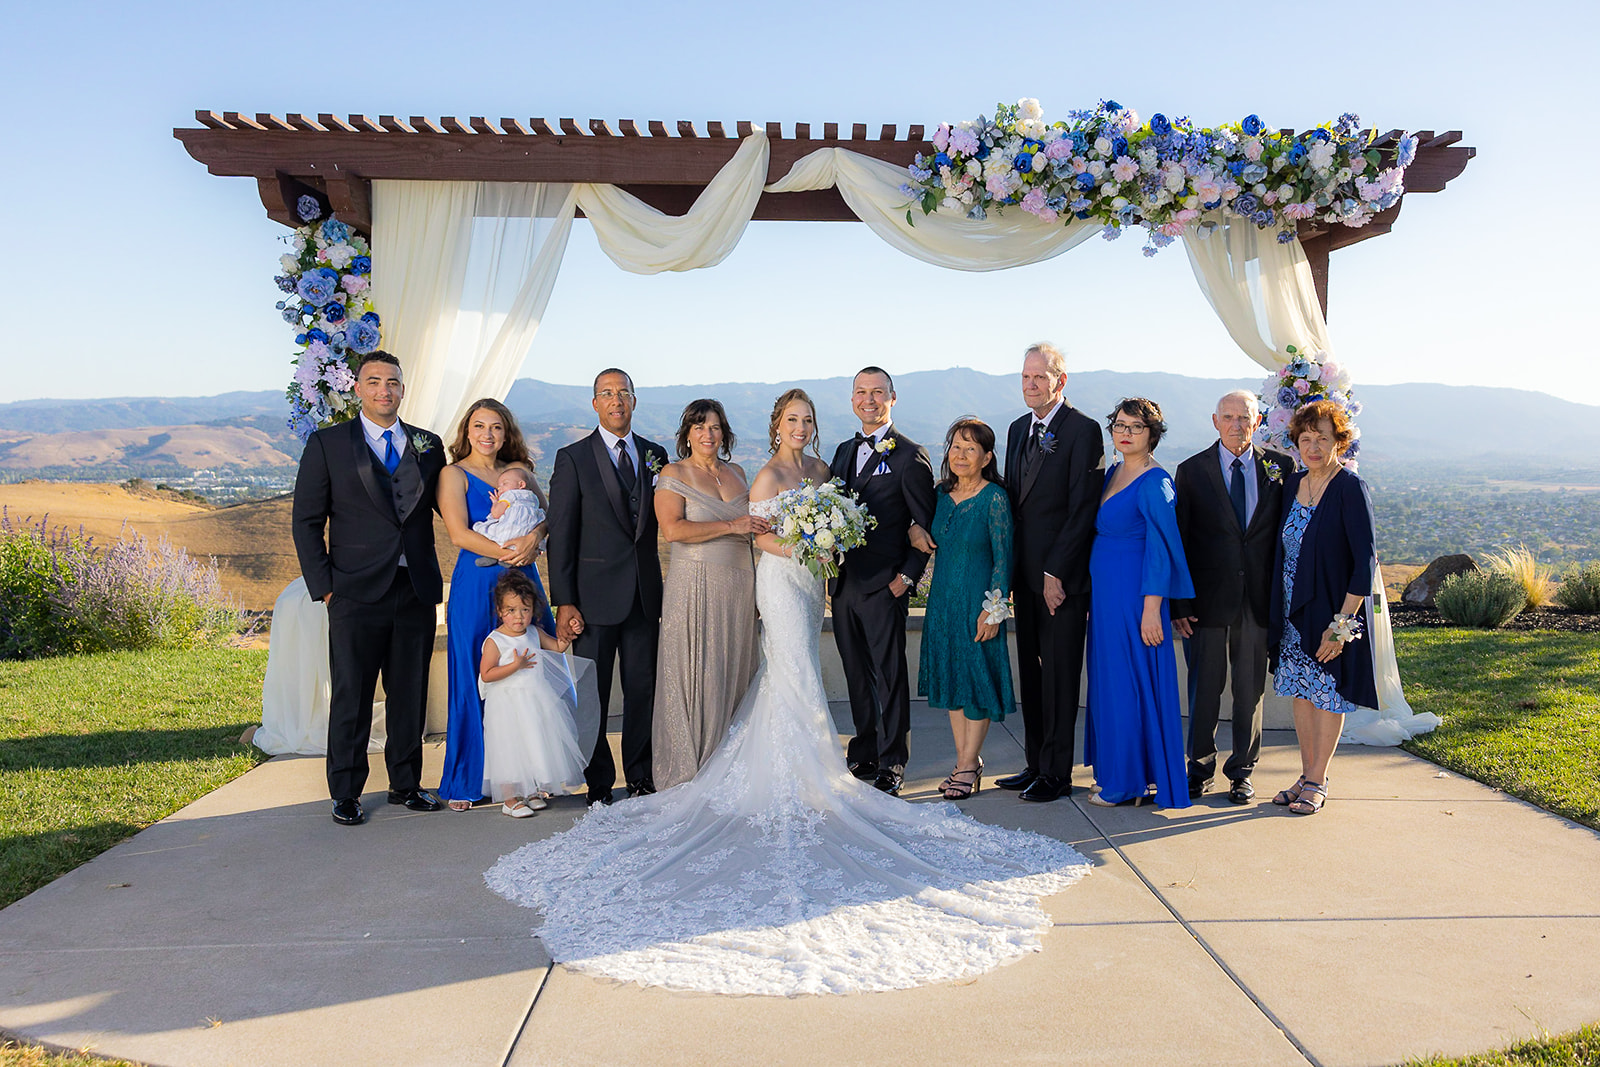 large family portrait at the alter with bride and groom